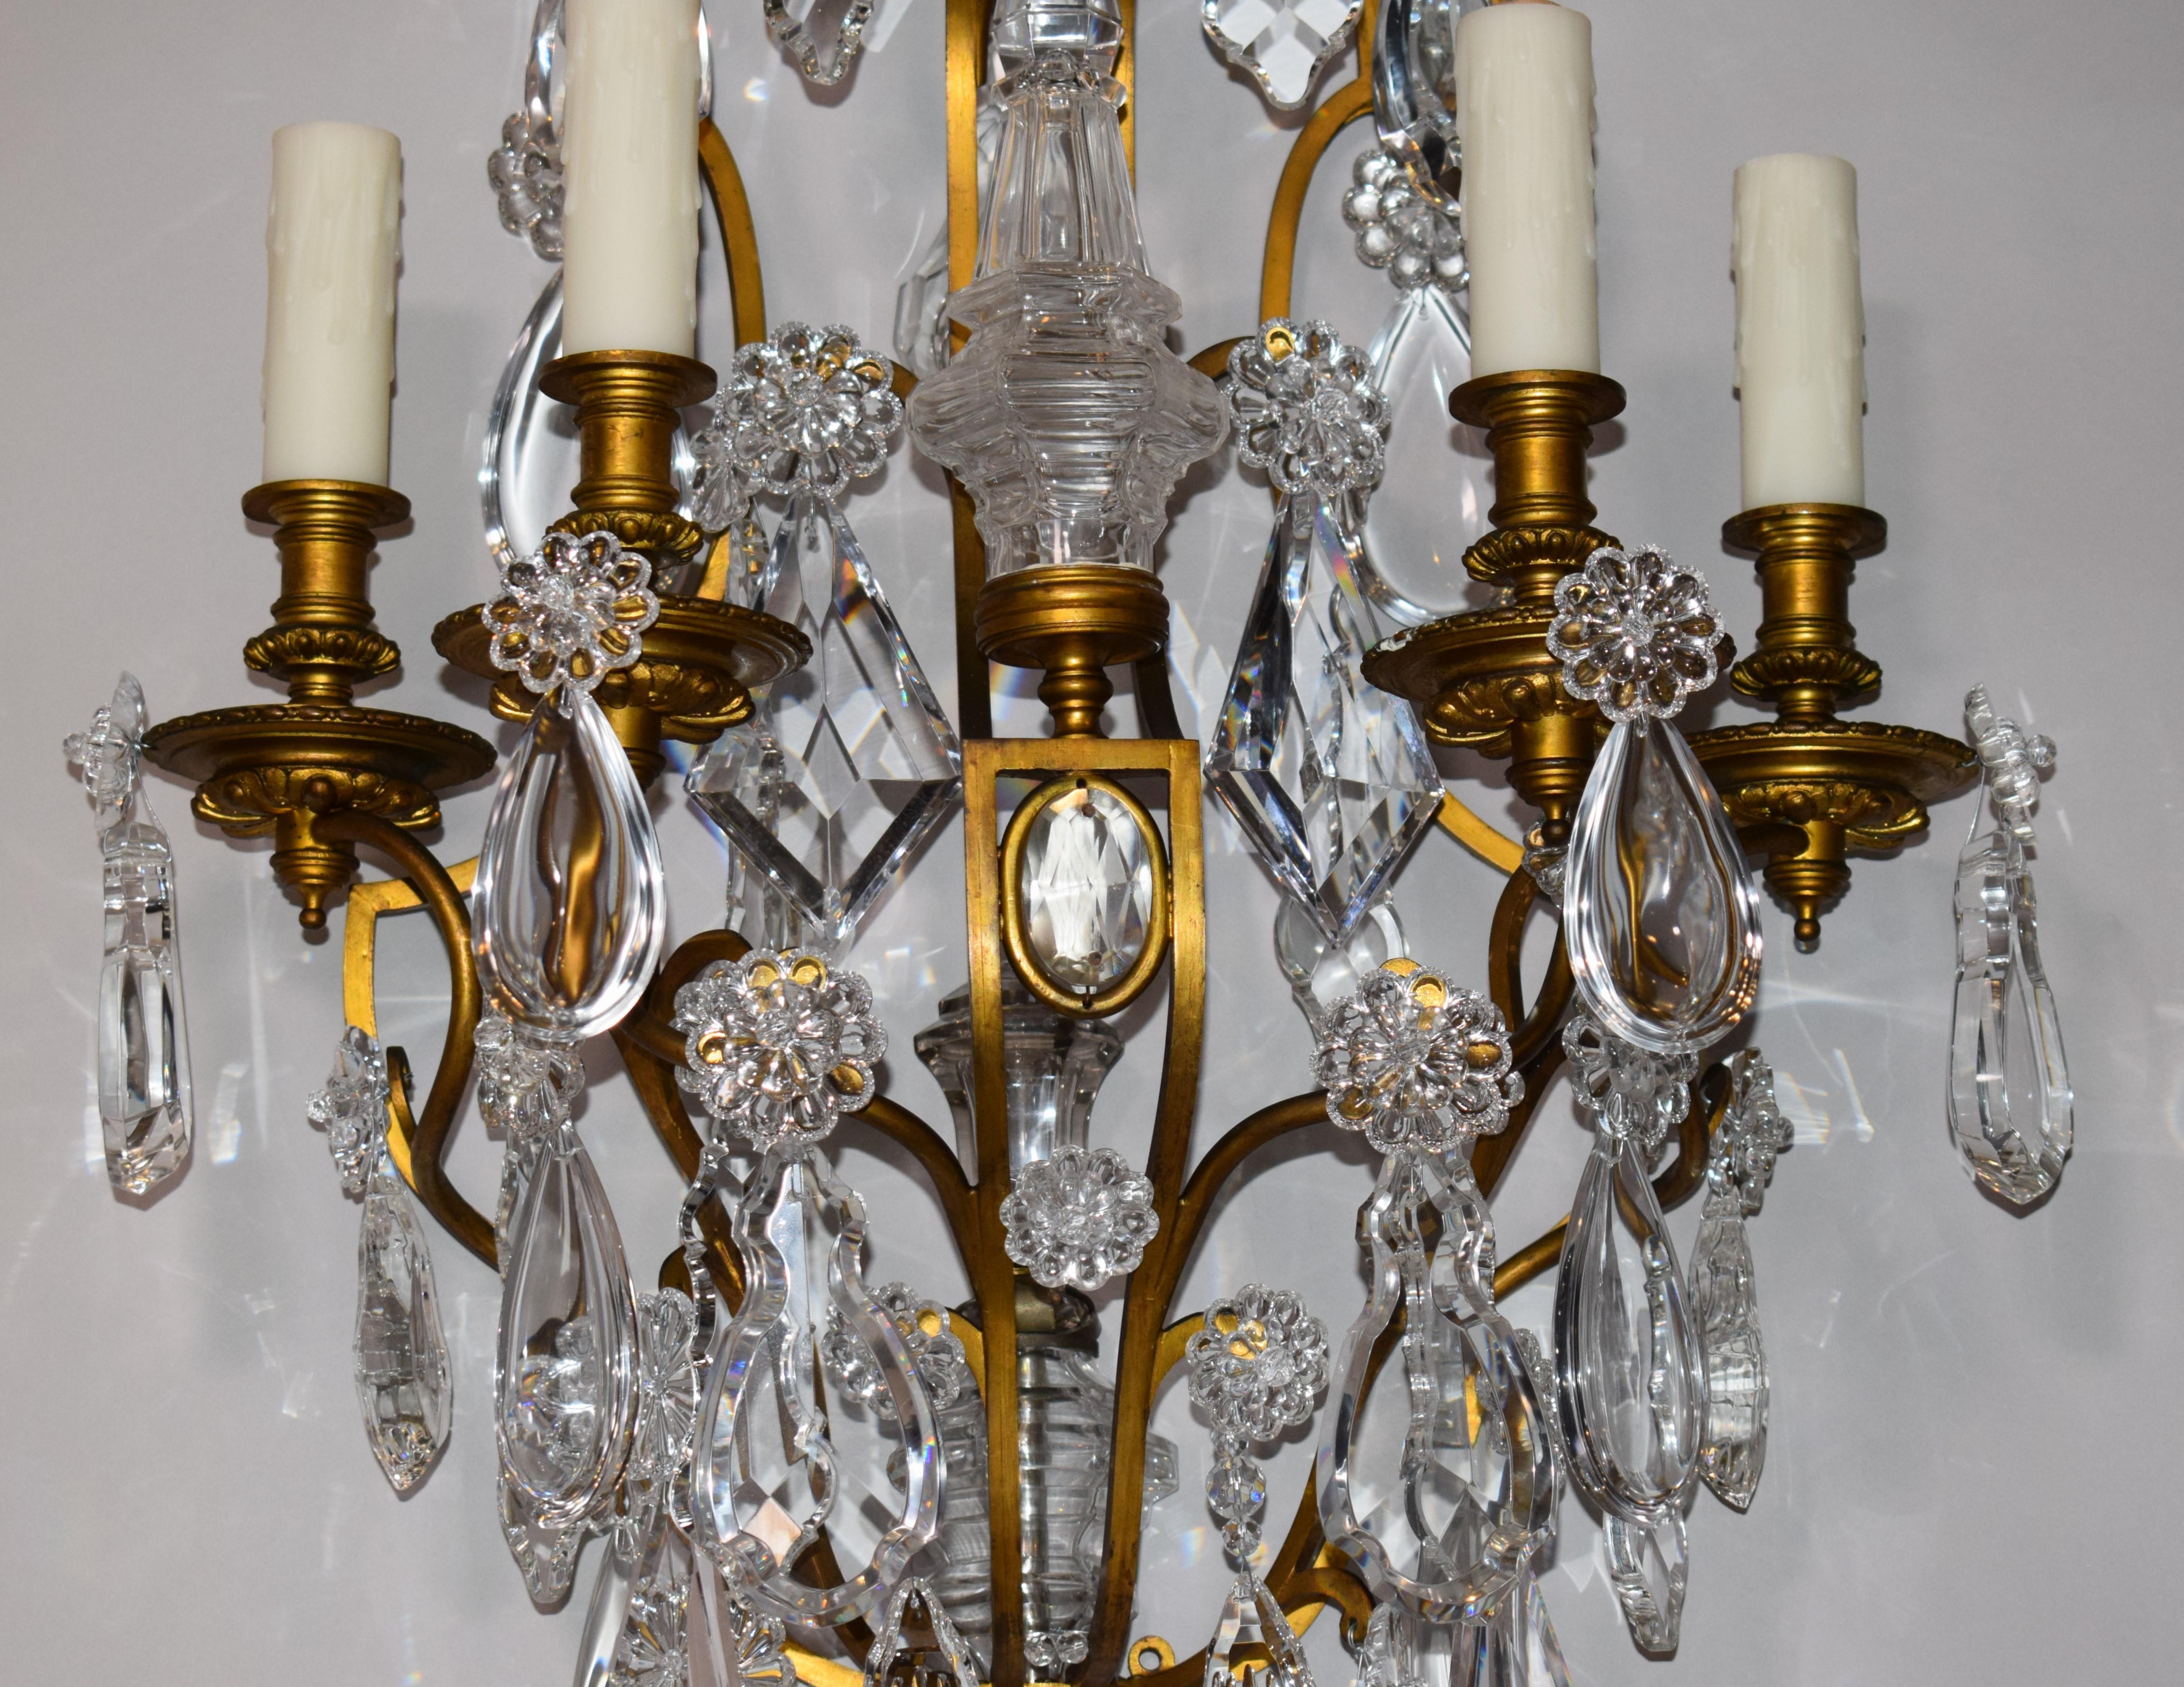 19th Century Exceptional Pair of Gilt Bronze & Crystal Wall Sconces by Baccarat For Sale